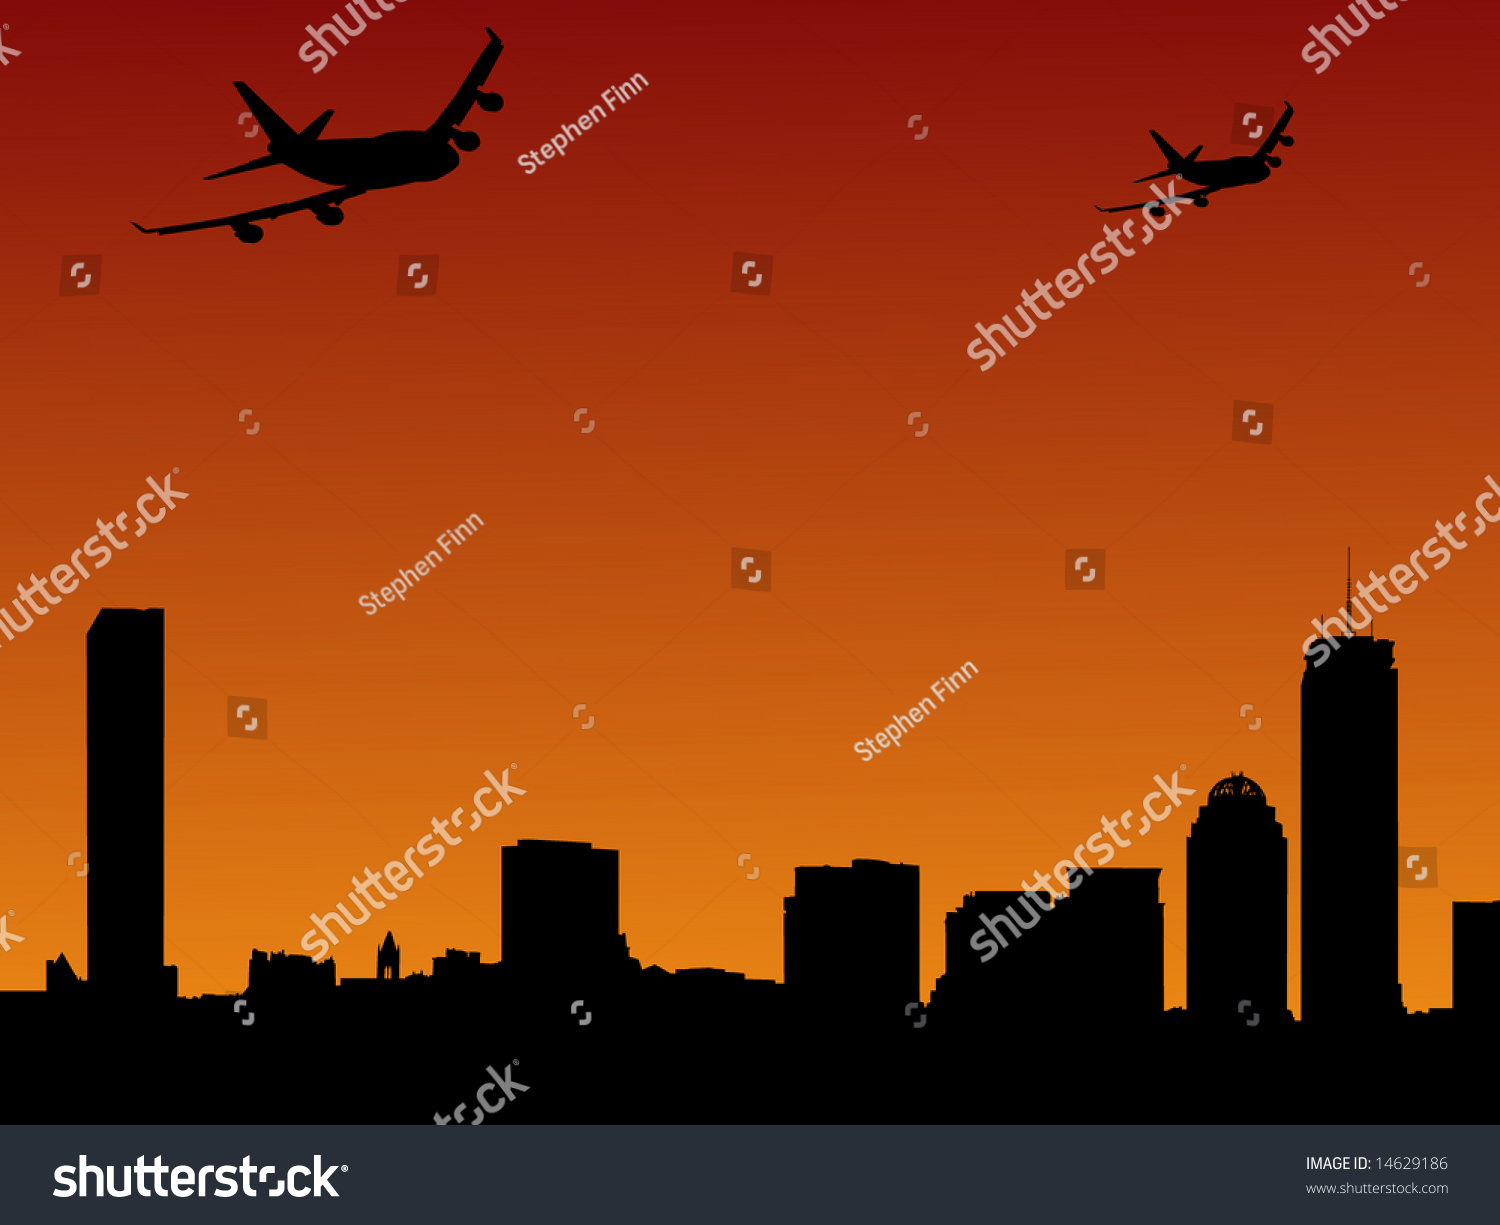 SVG of Boston skylines and two planes arriving illustration svg